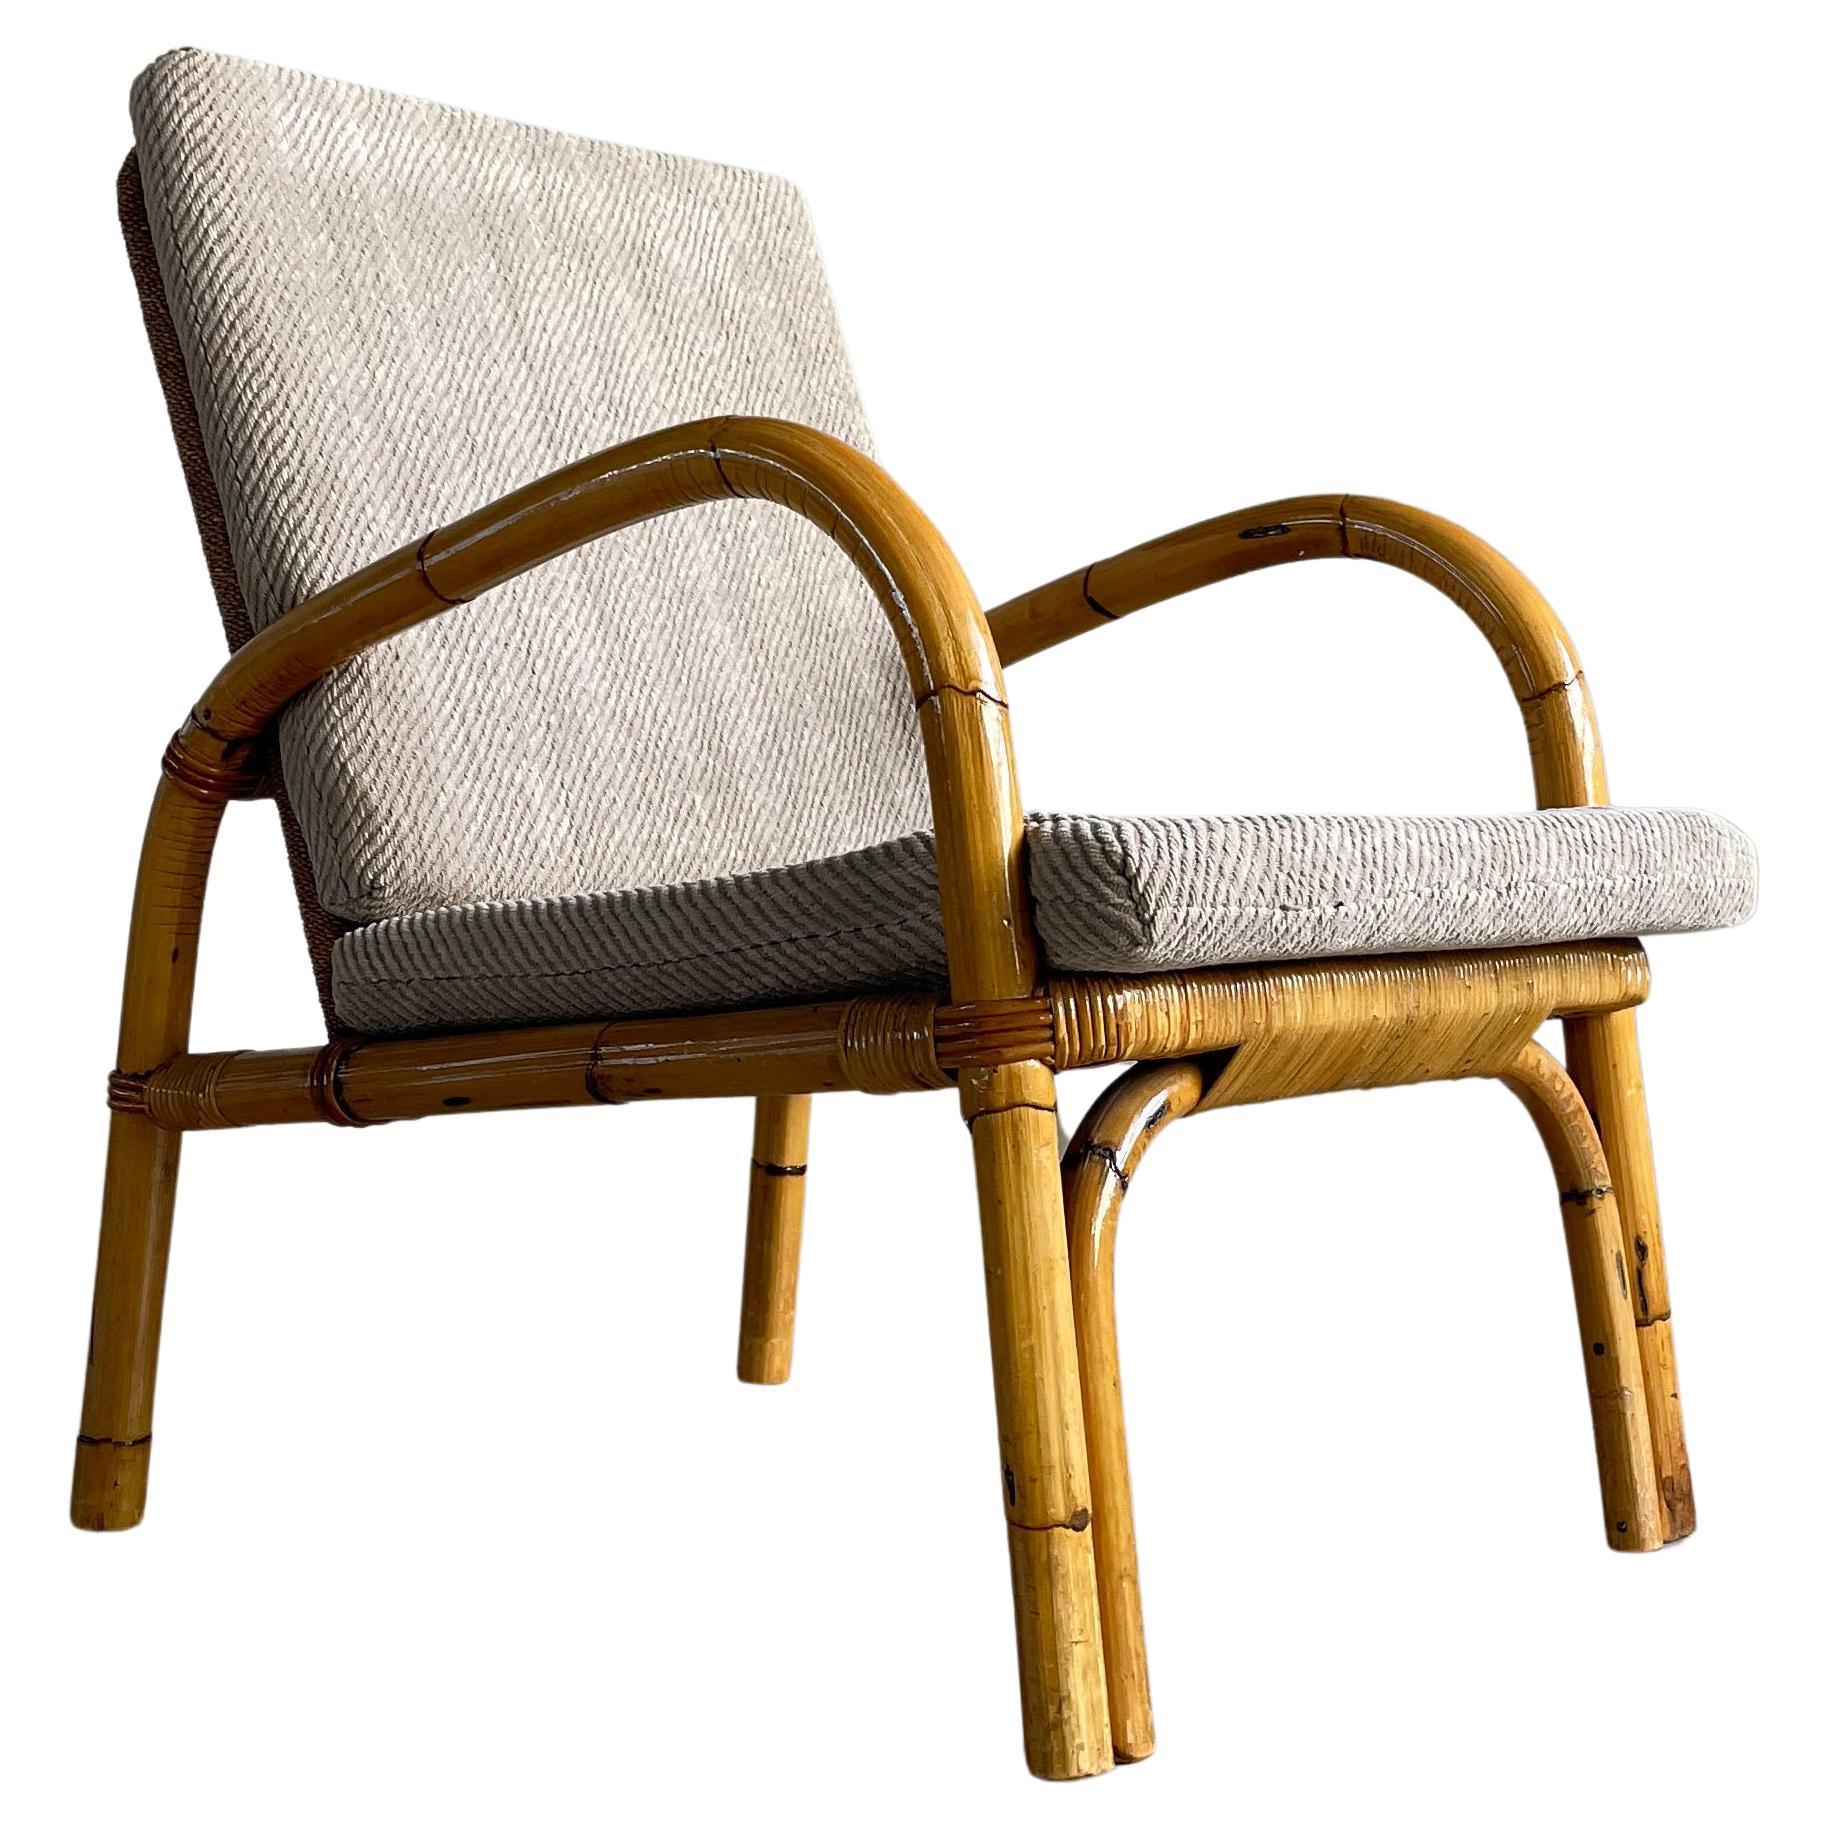 1950’s Adrien Audoux & Frida Minet Bamboo Armchair with rattan and braided rope backrest. Beige woolen upholstered seat and rear cushions. In prime original condition.
Design: Adrien Audoux & Frida Minet, 1950 - 1959